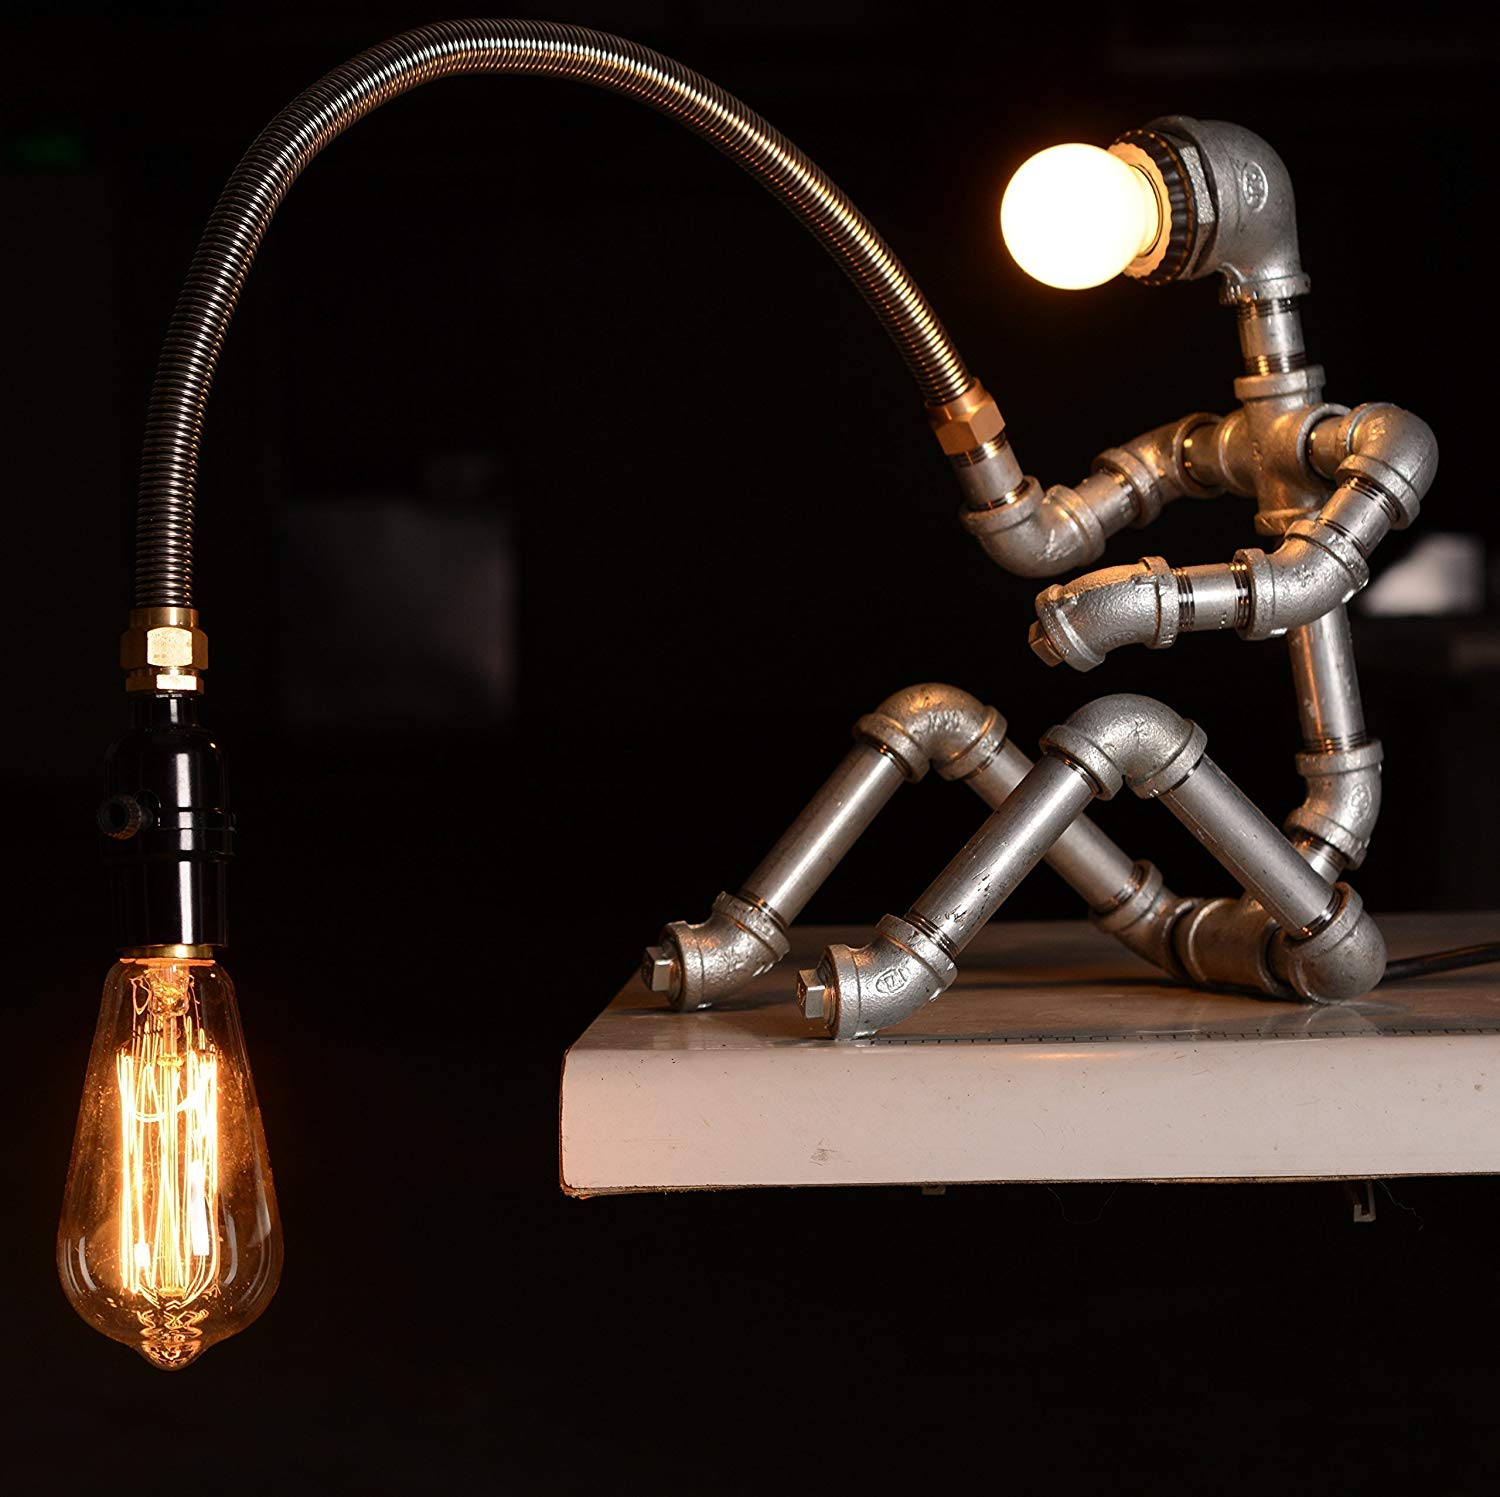 Are you a fan of fishing or weird-ass lamps? Then we have the thing for you.<br><br>This particular weird-ass lamp is available for purchase <a href="https://amzn.to/2LBHWIv" "nofollow" target="_blank">here</a>.